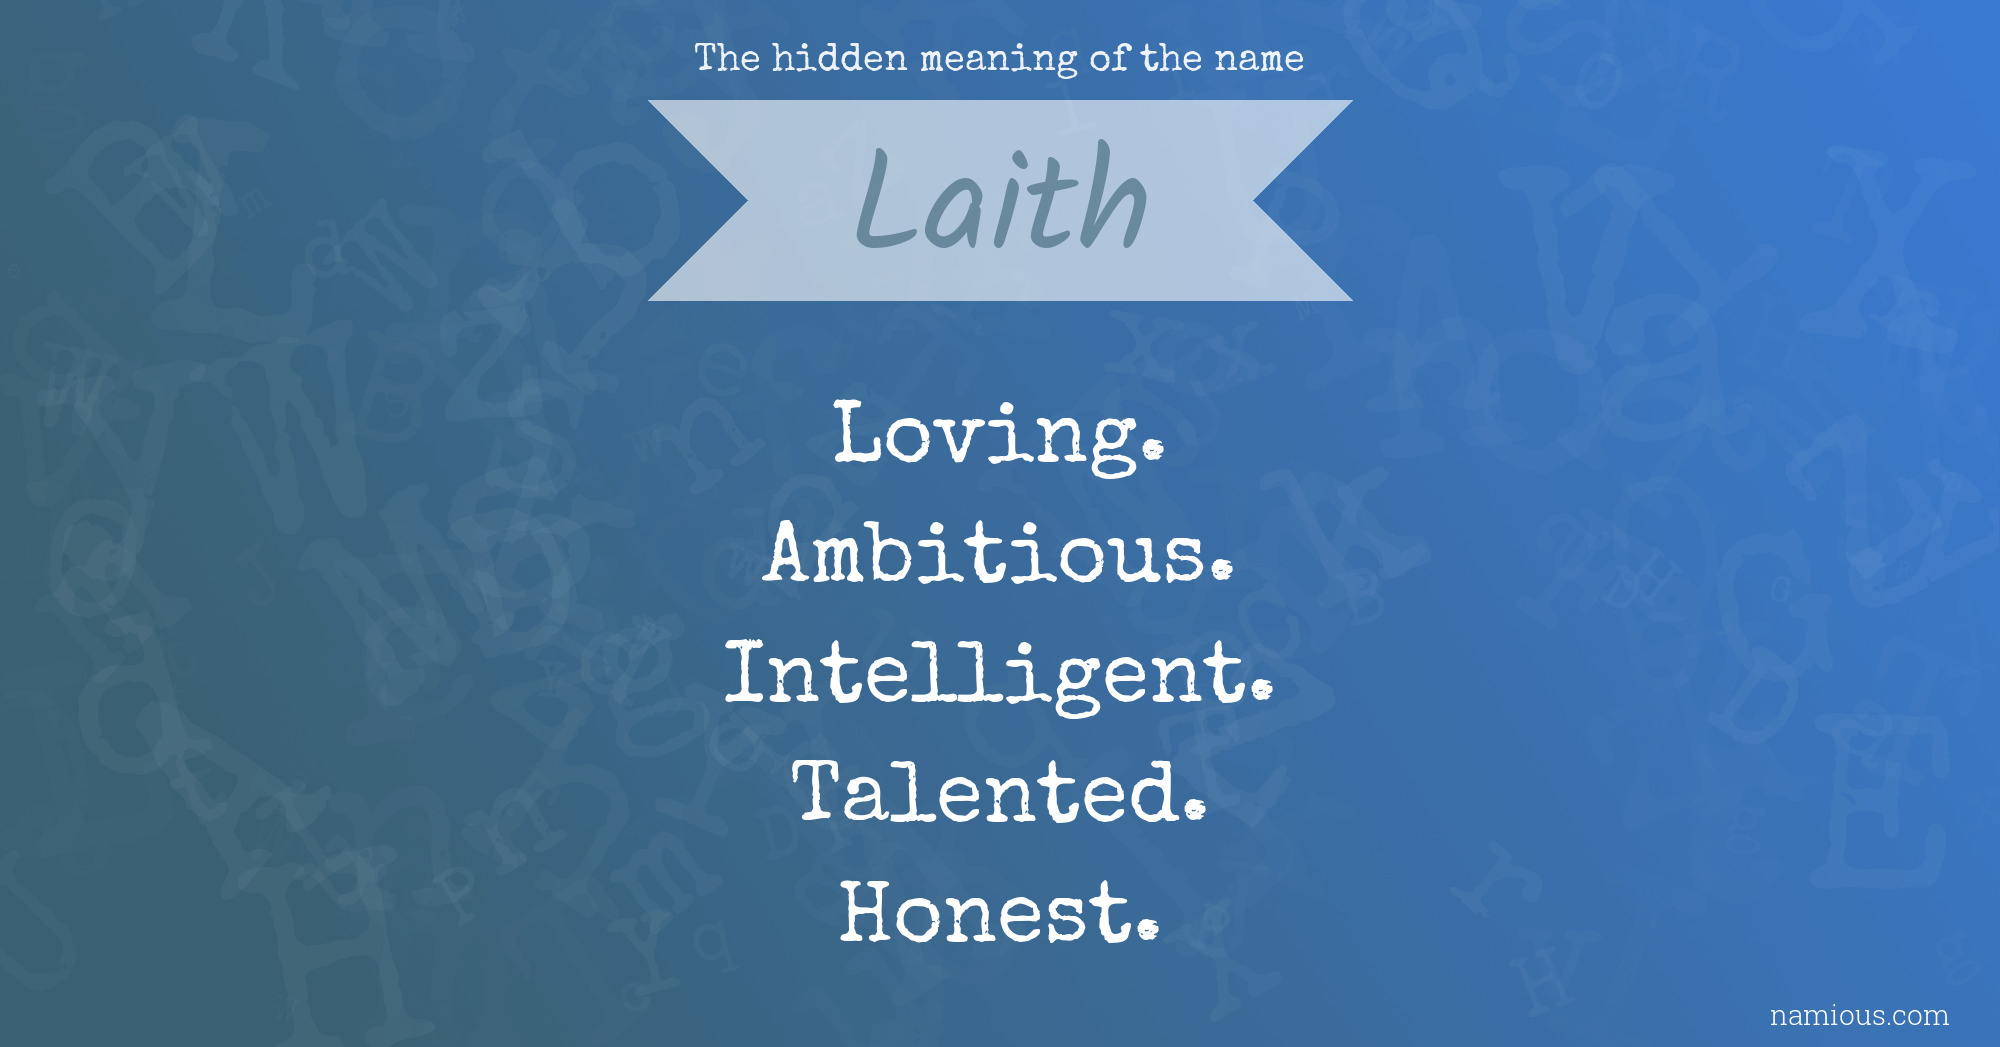 The hidden meaning of the name Laith